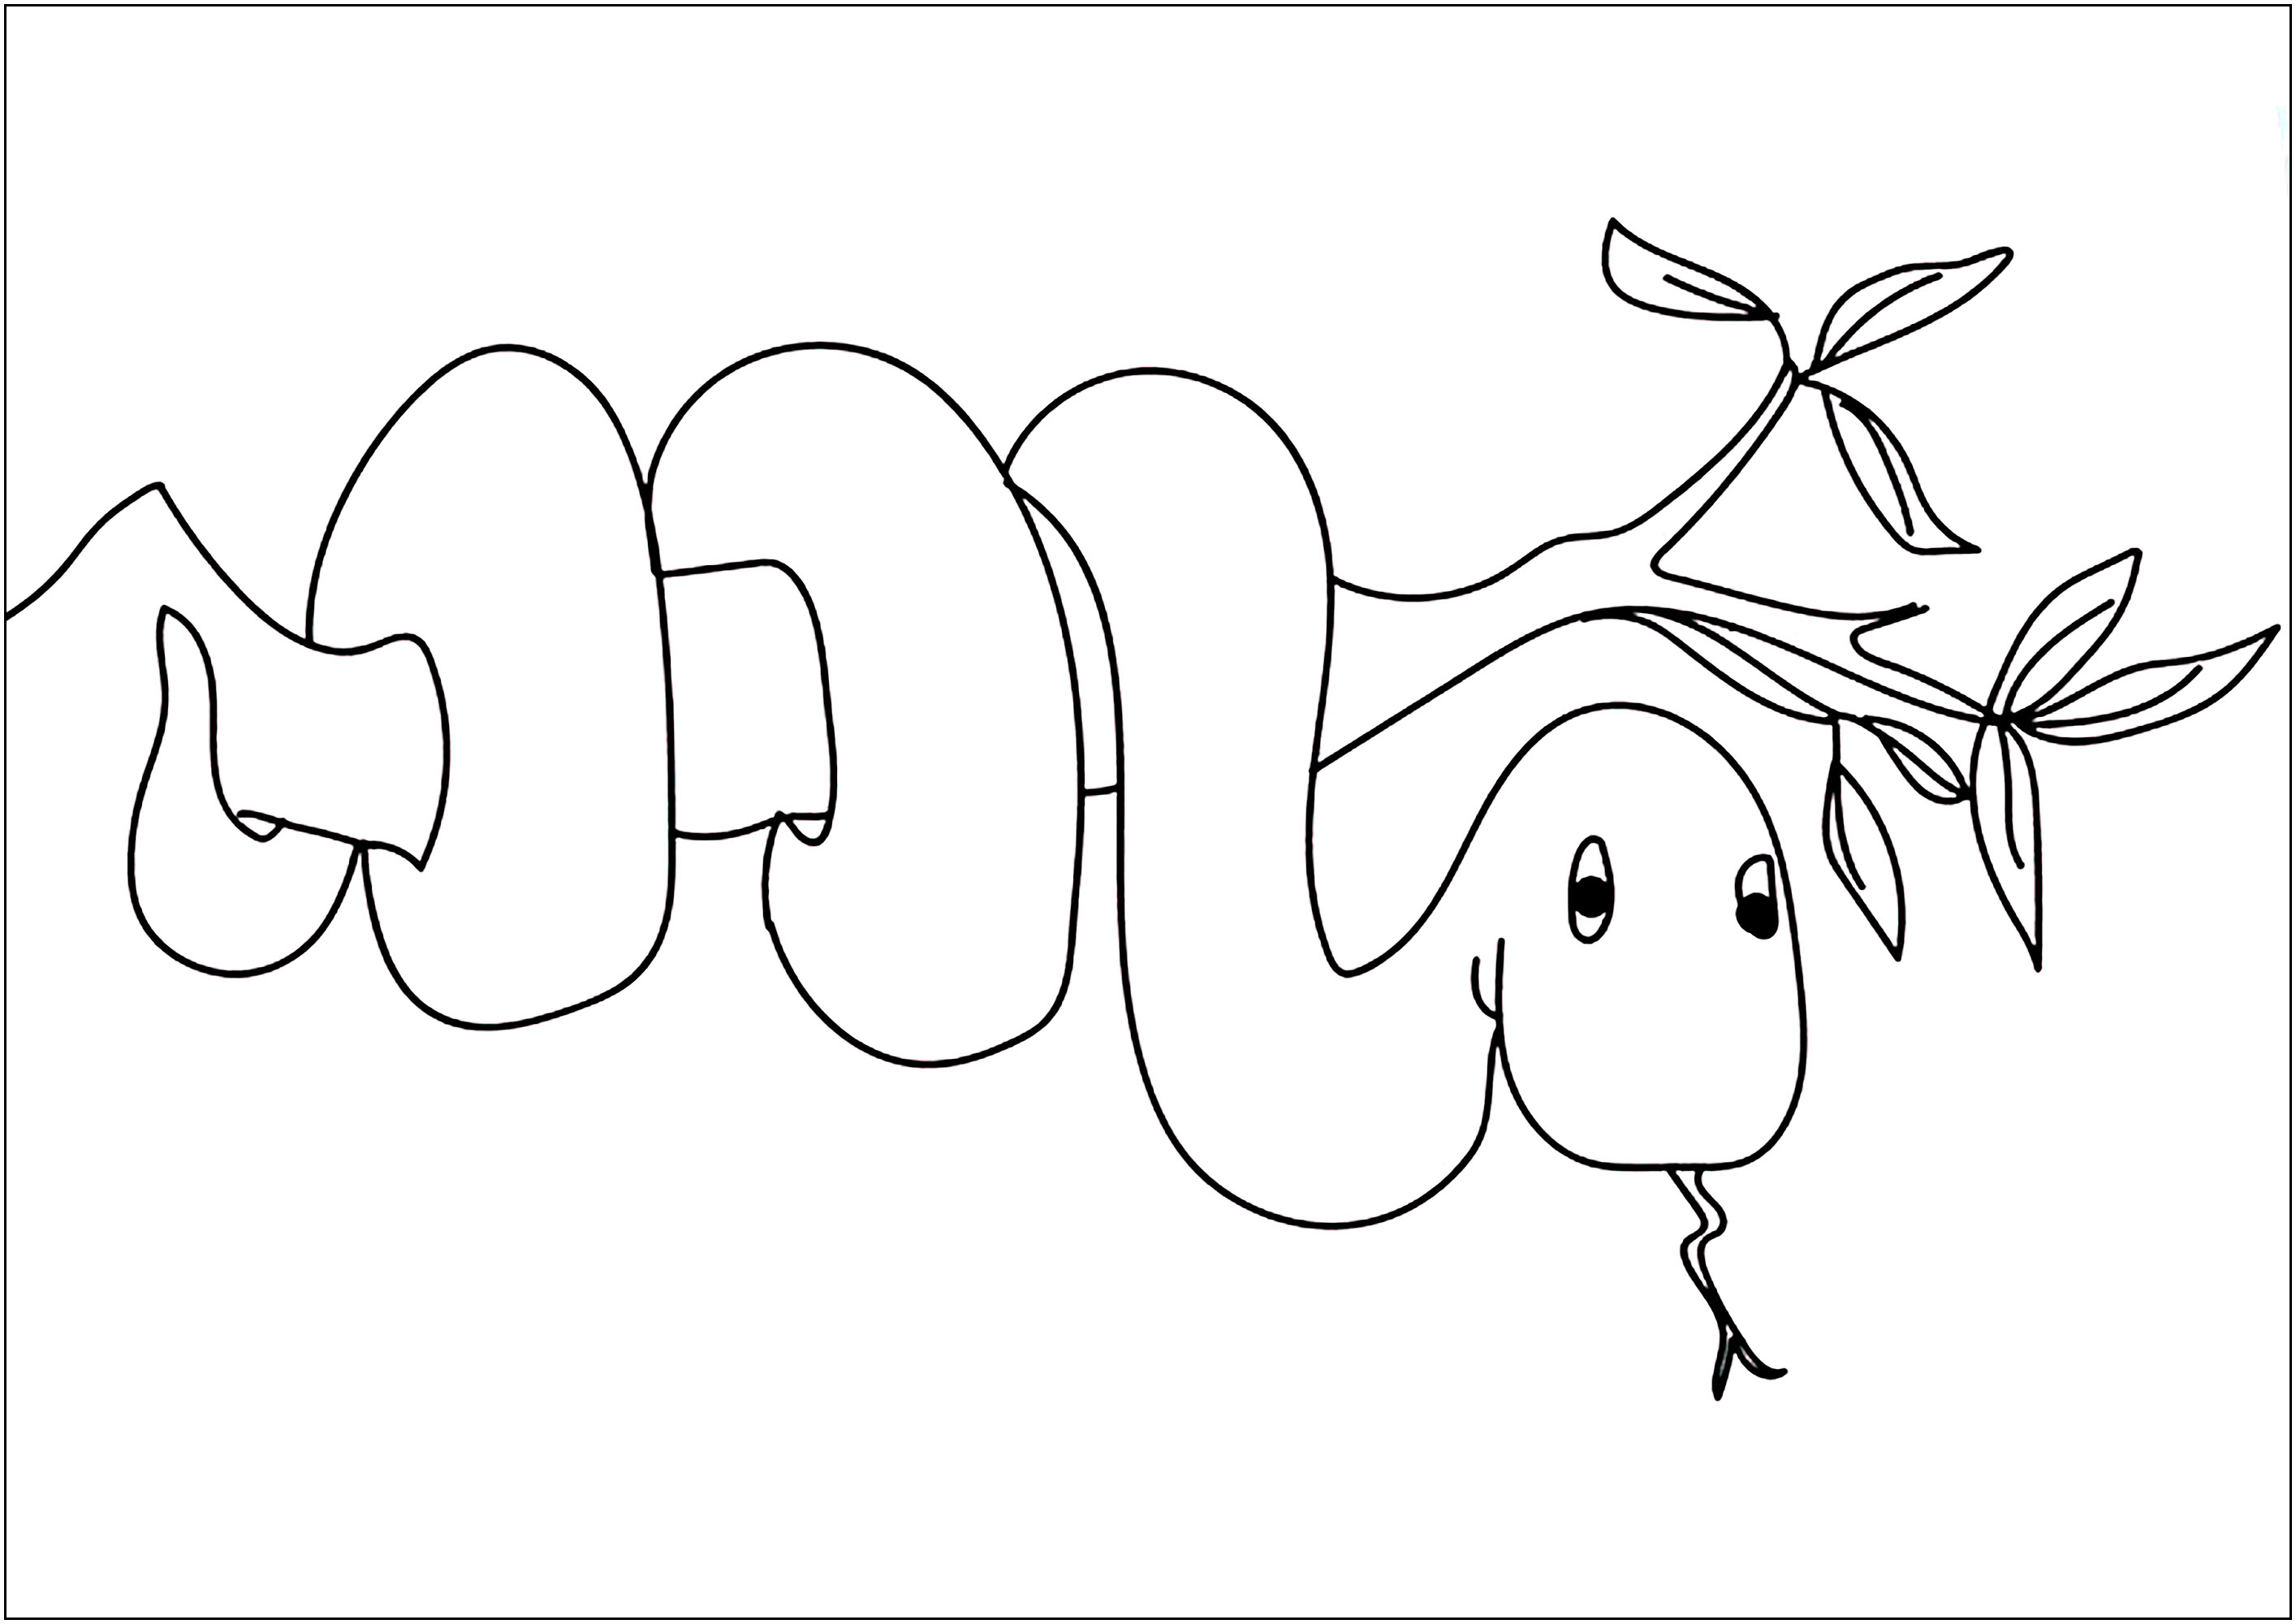 Snakes coloring page to print and color